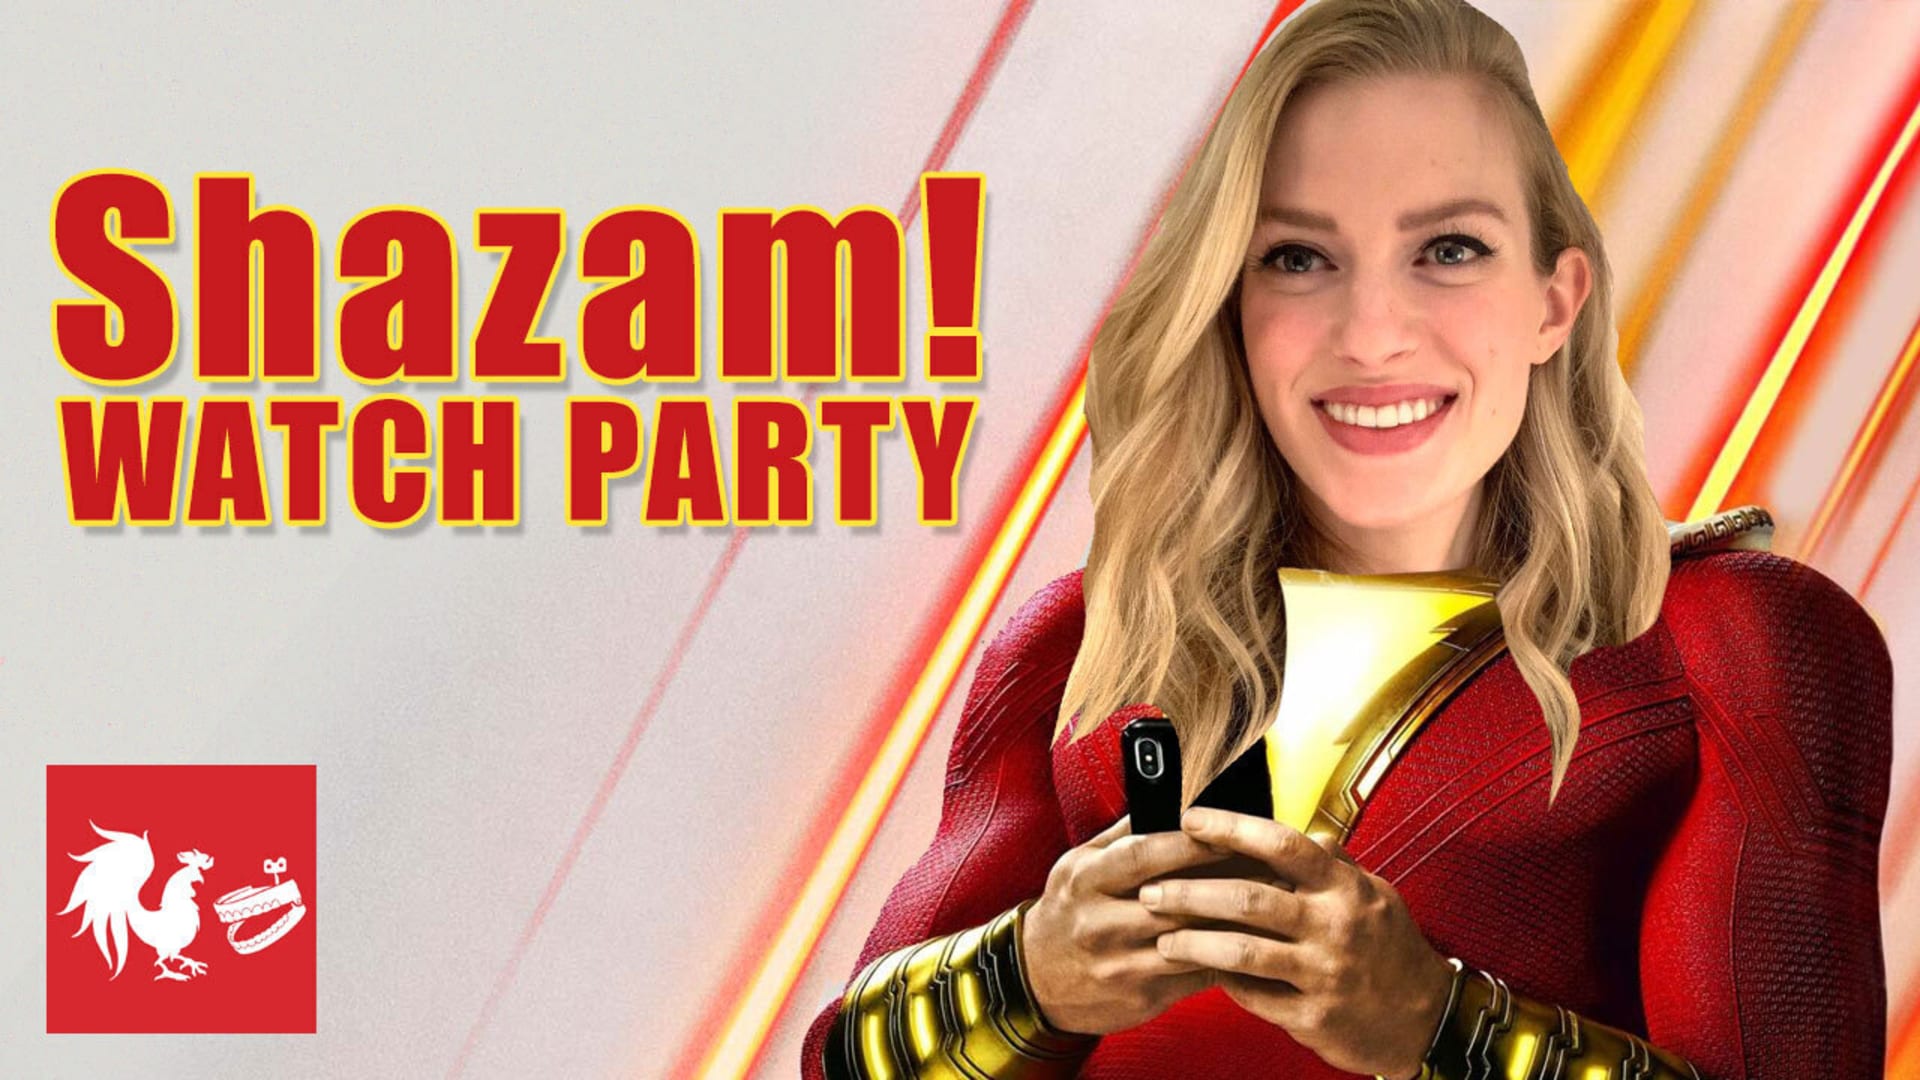 Weekend Watch: Celebrating the Release of Shazam!